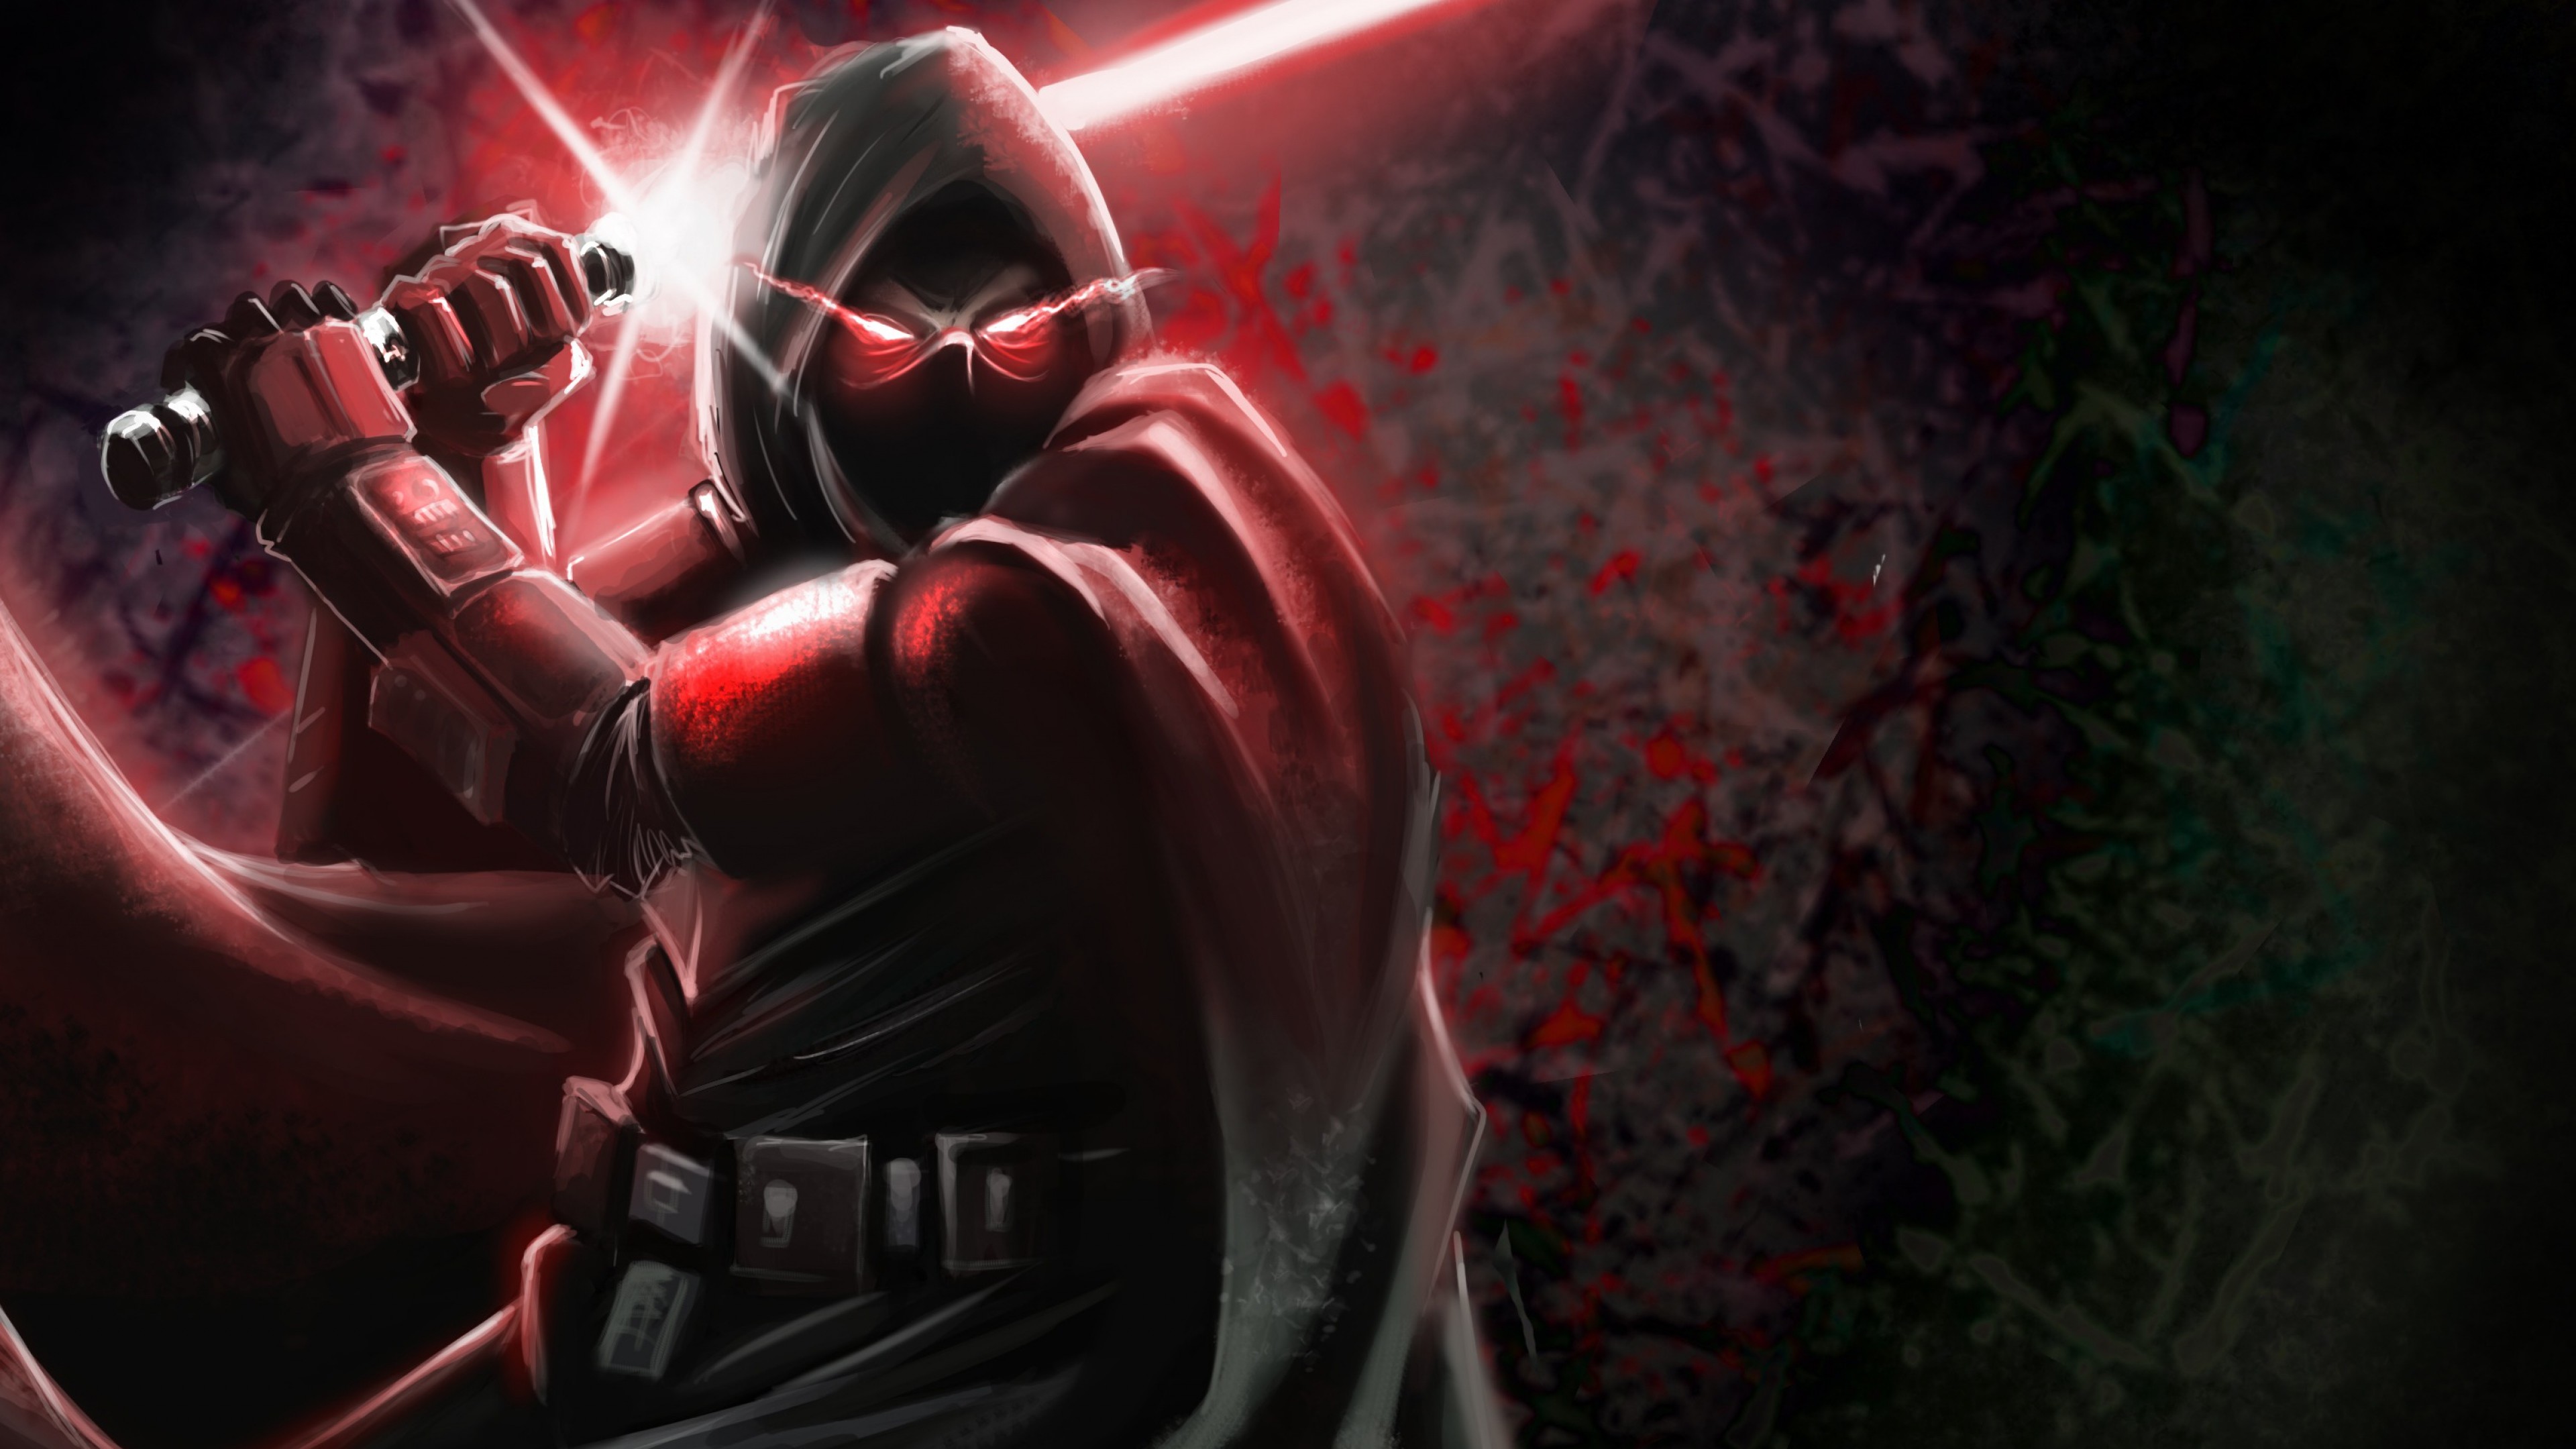 3840x2160 Star Wars Sith Wallpapers Images As Wallpaper HD